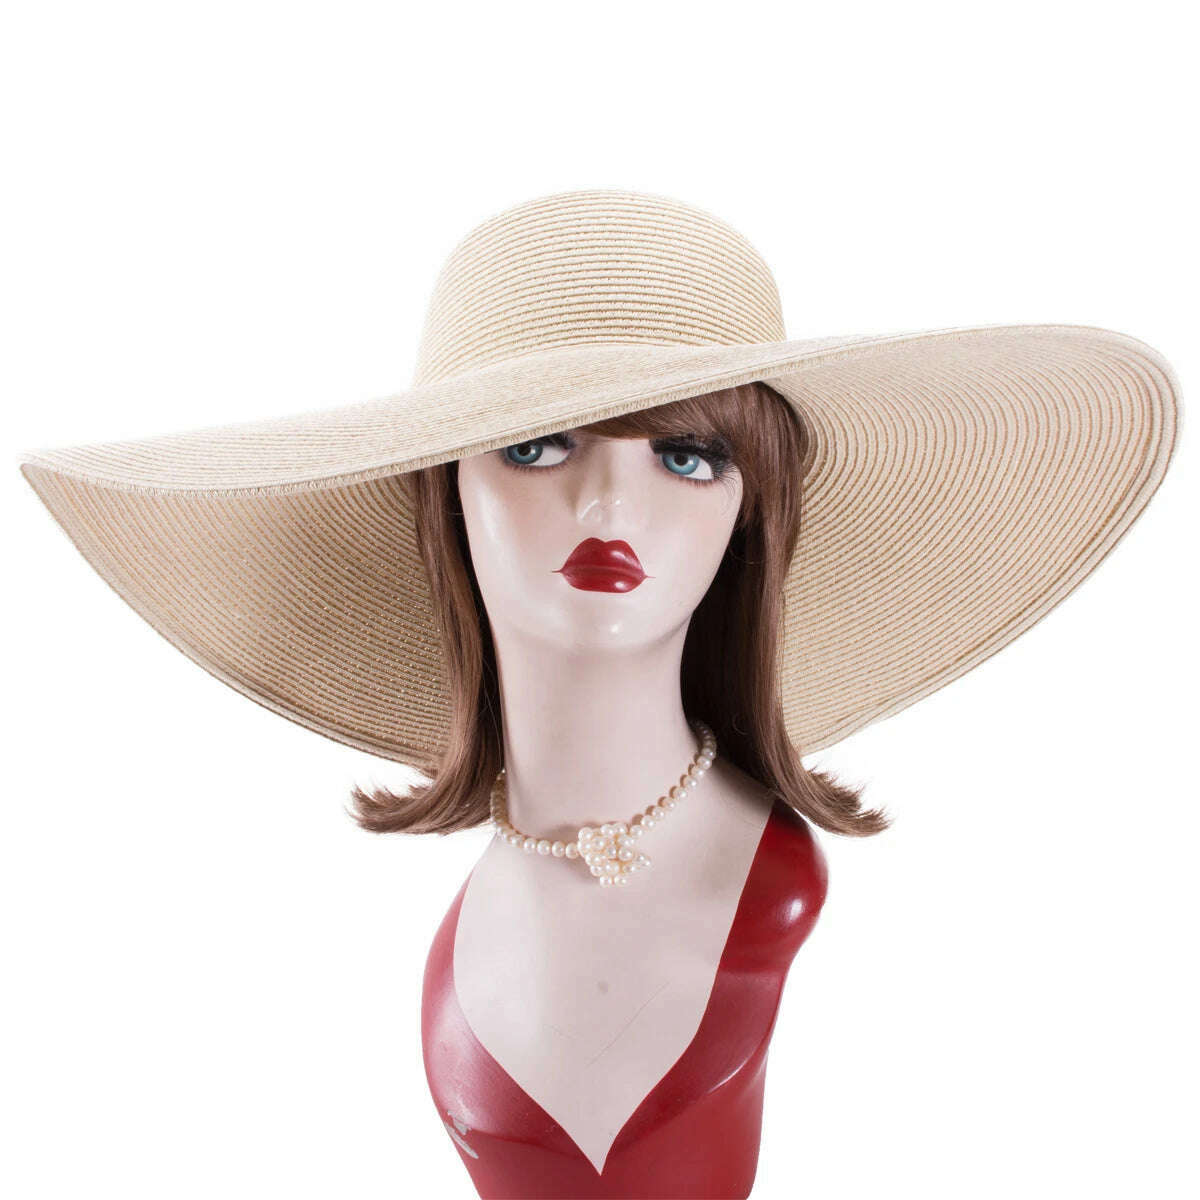 KIMLUD, Lawliet 7.1''/18cm Foldable Oversized Huge Wide Brim Sun Beach Straw Hats Wedding Womens Floppy Party Dressy A330, Natural / CHINA, KIMLUD Womens Clothes